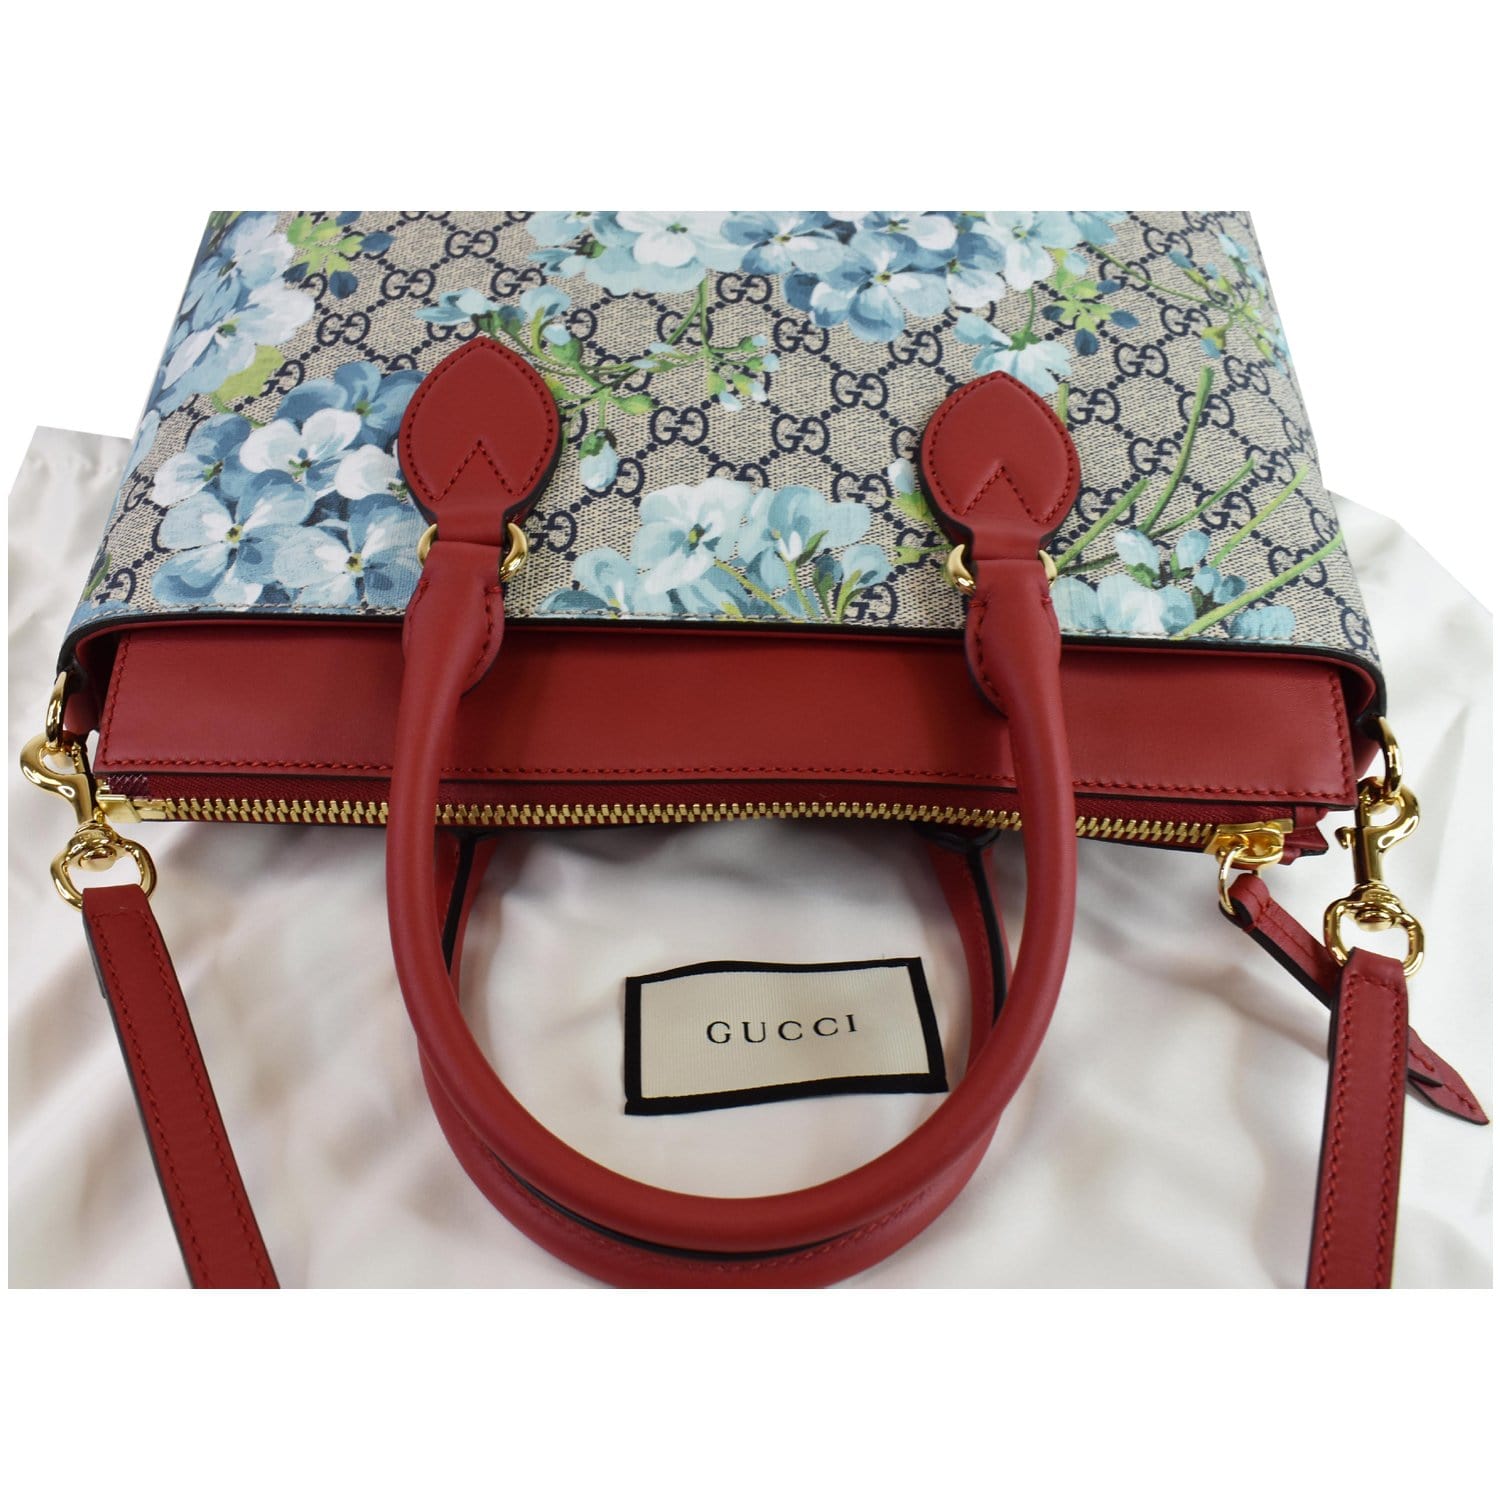 Auth GUCCI GG Blooms Clutch Bag Beige Red PVC Leather Suede w/ Box